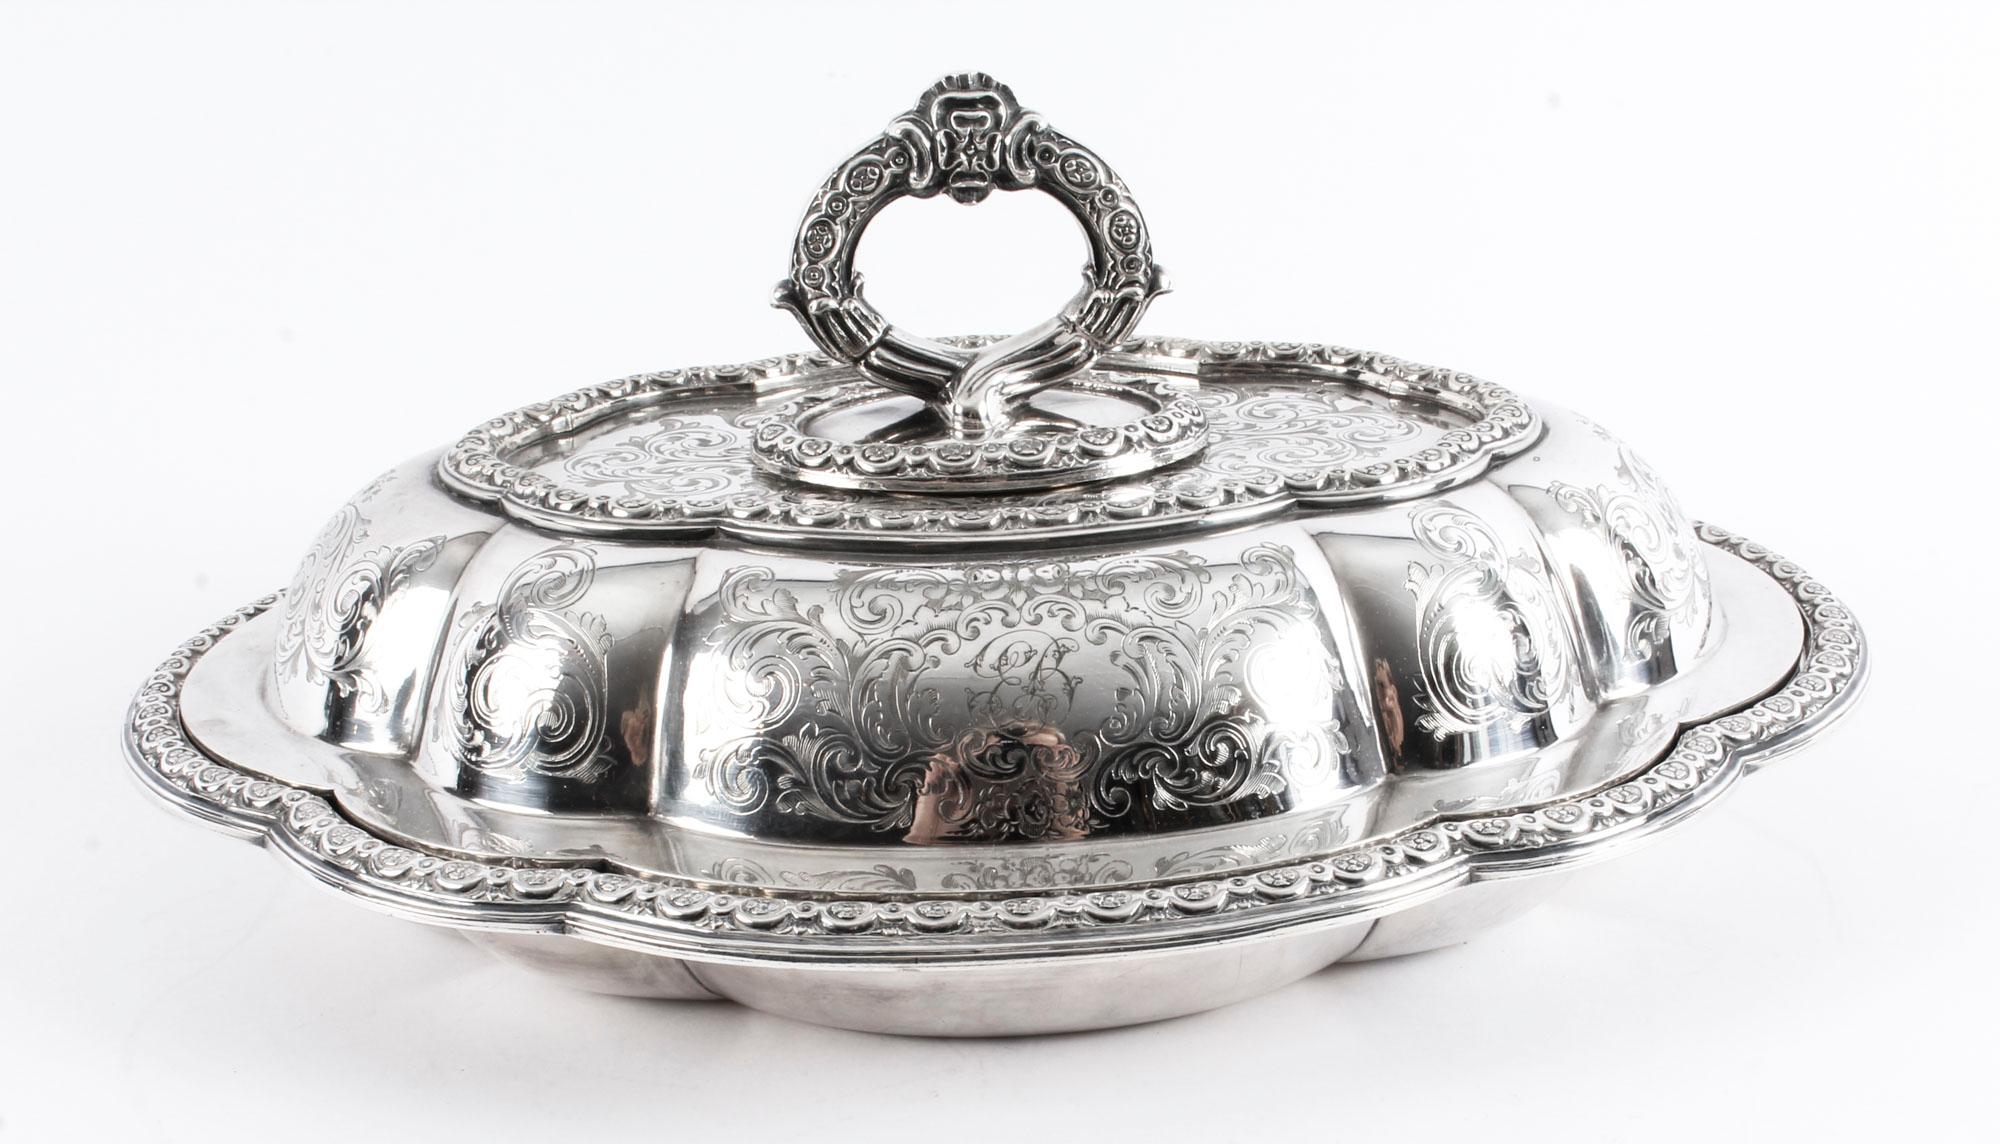 Late 19th Century Antique Victorian Tureen Entree Dish by Collins and Co. London, 19th Century